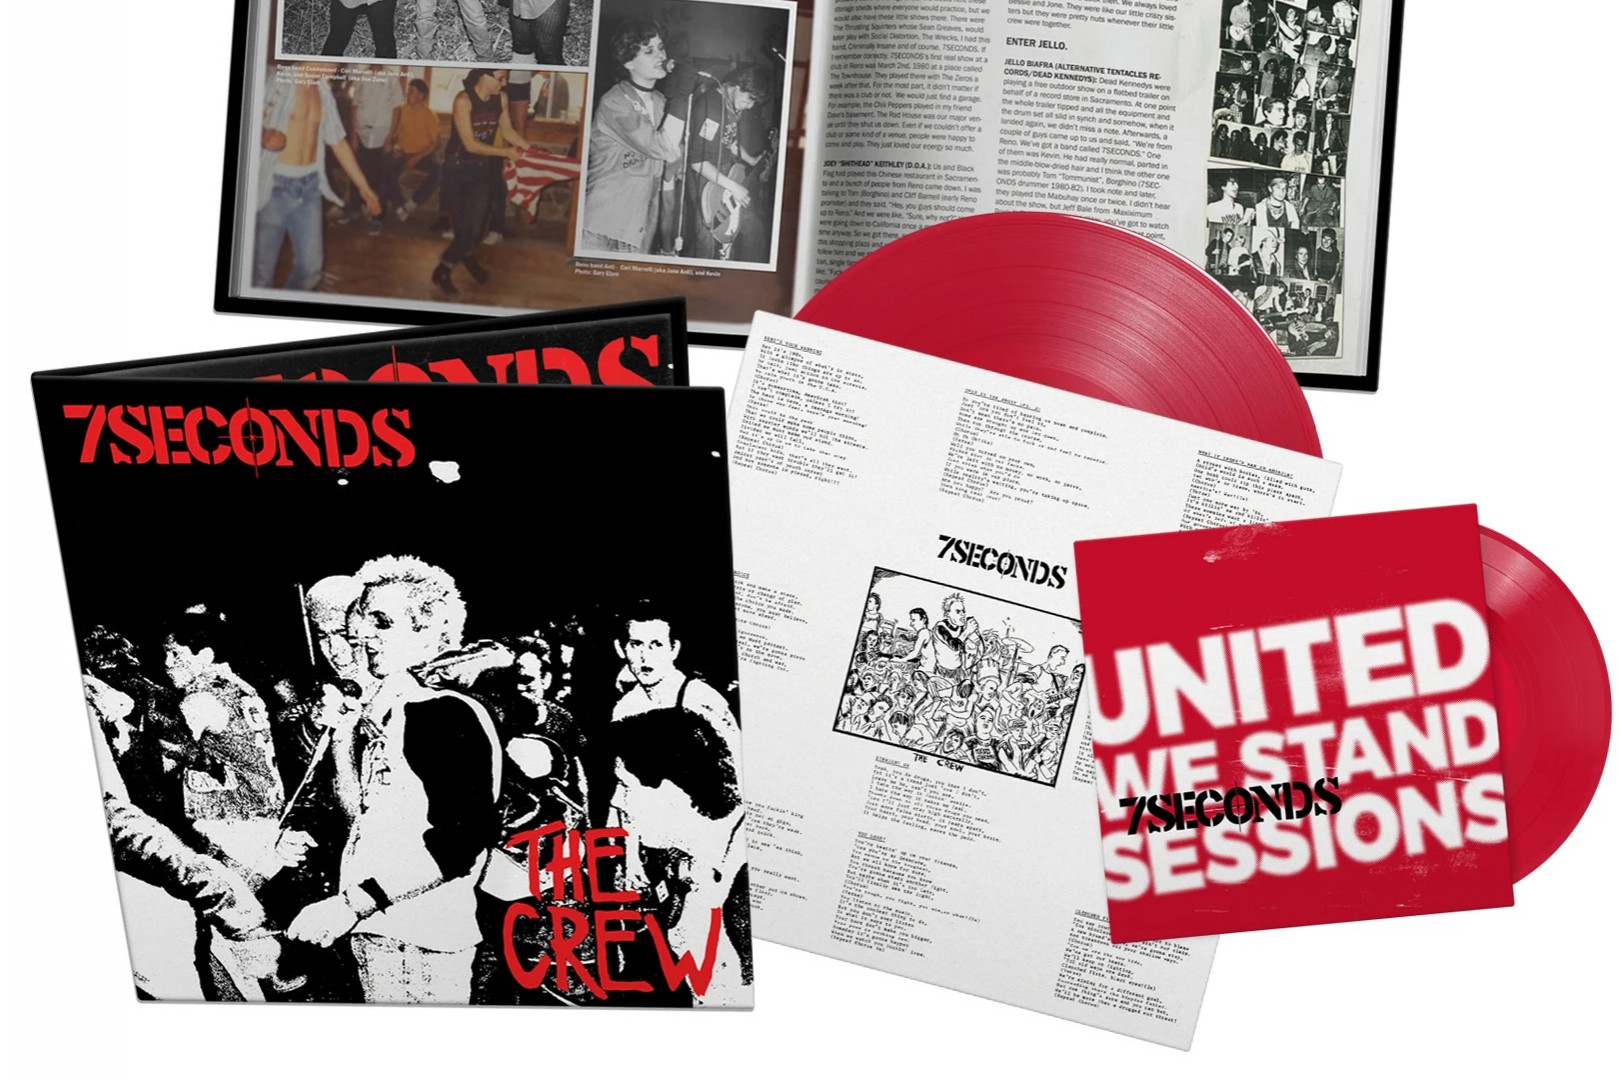 7Seconds to reissue 'The Crew'